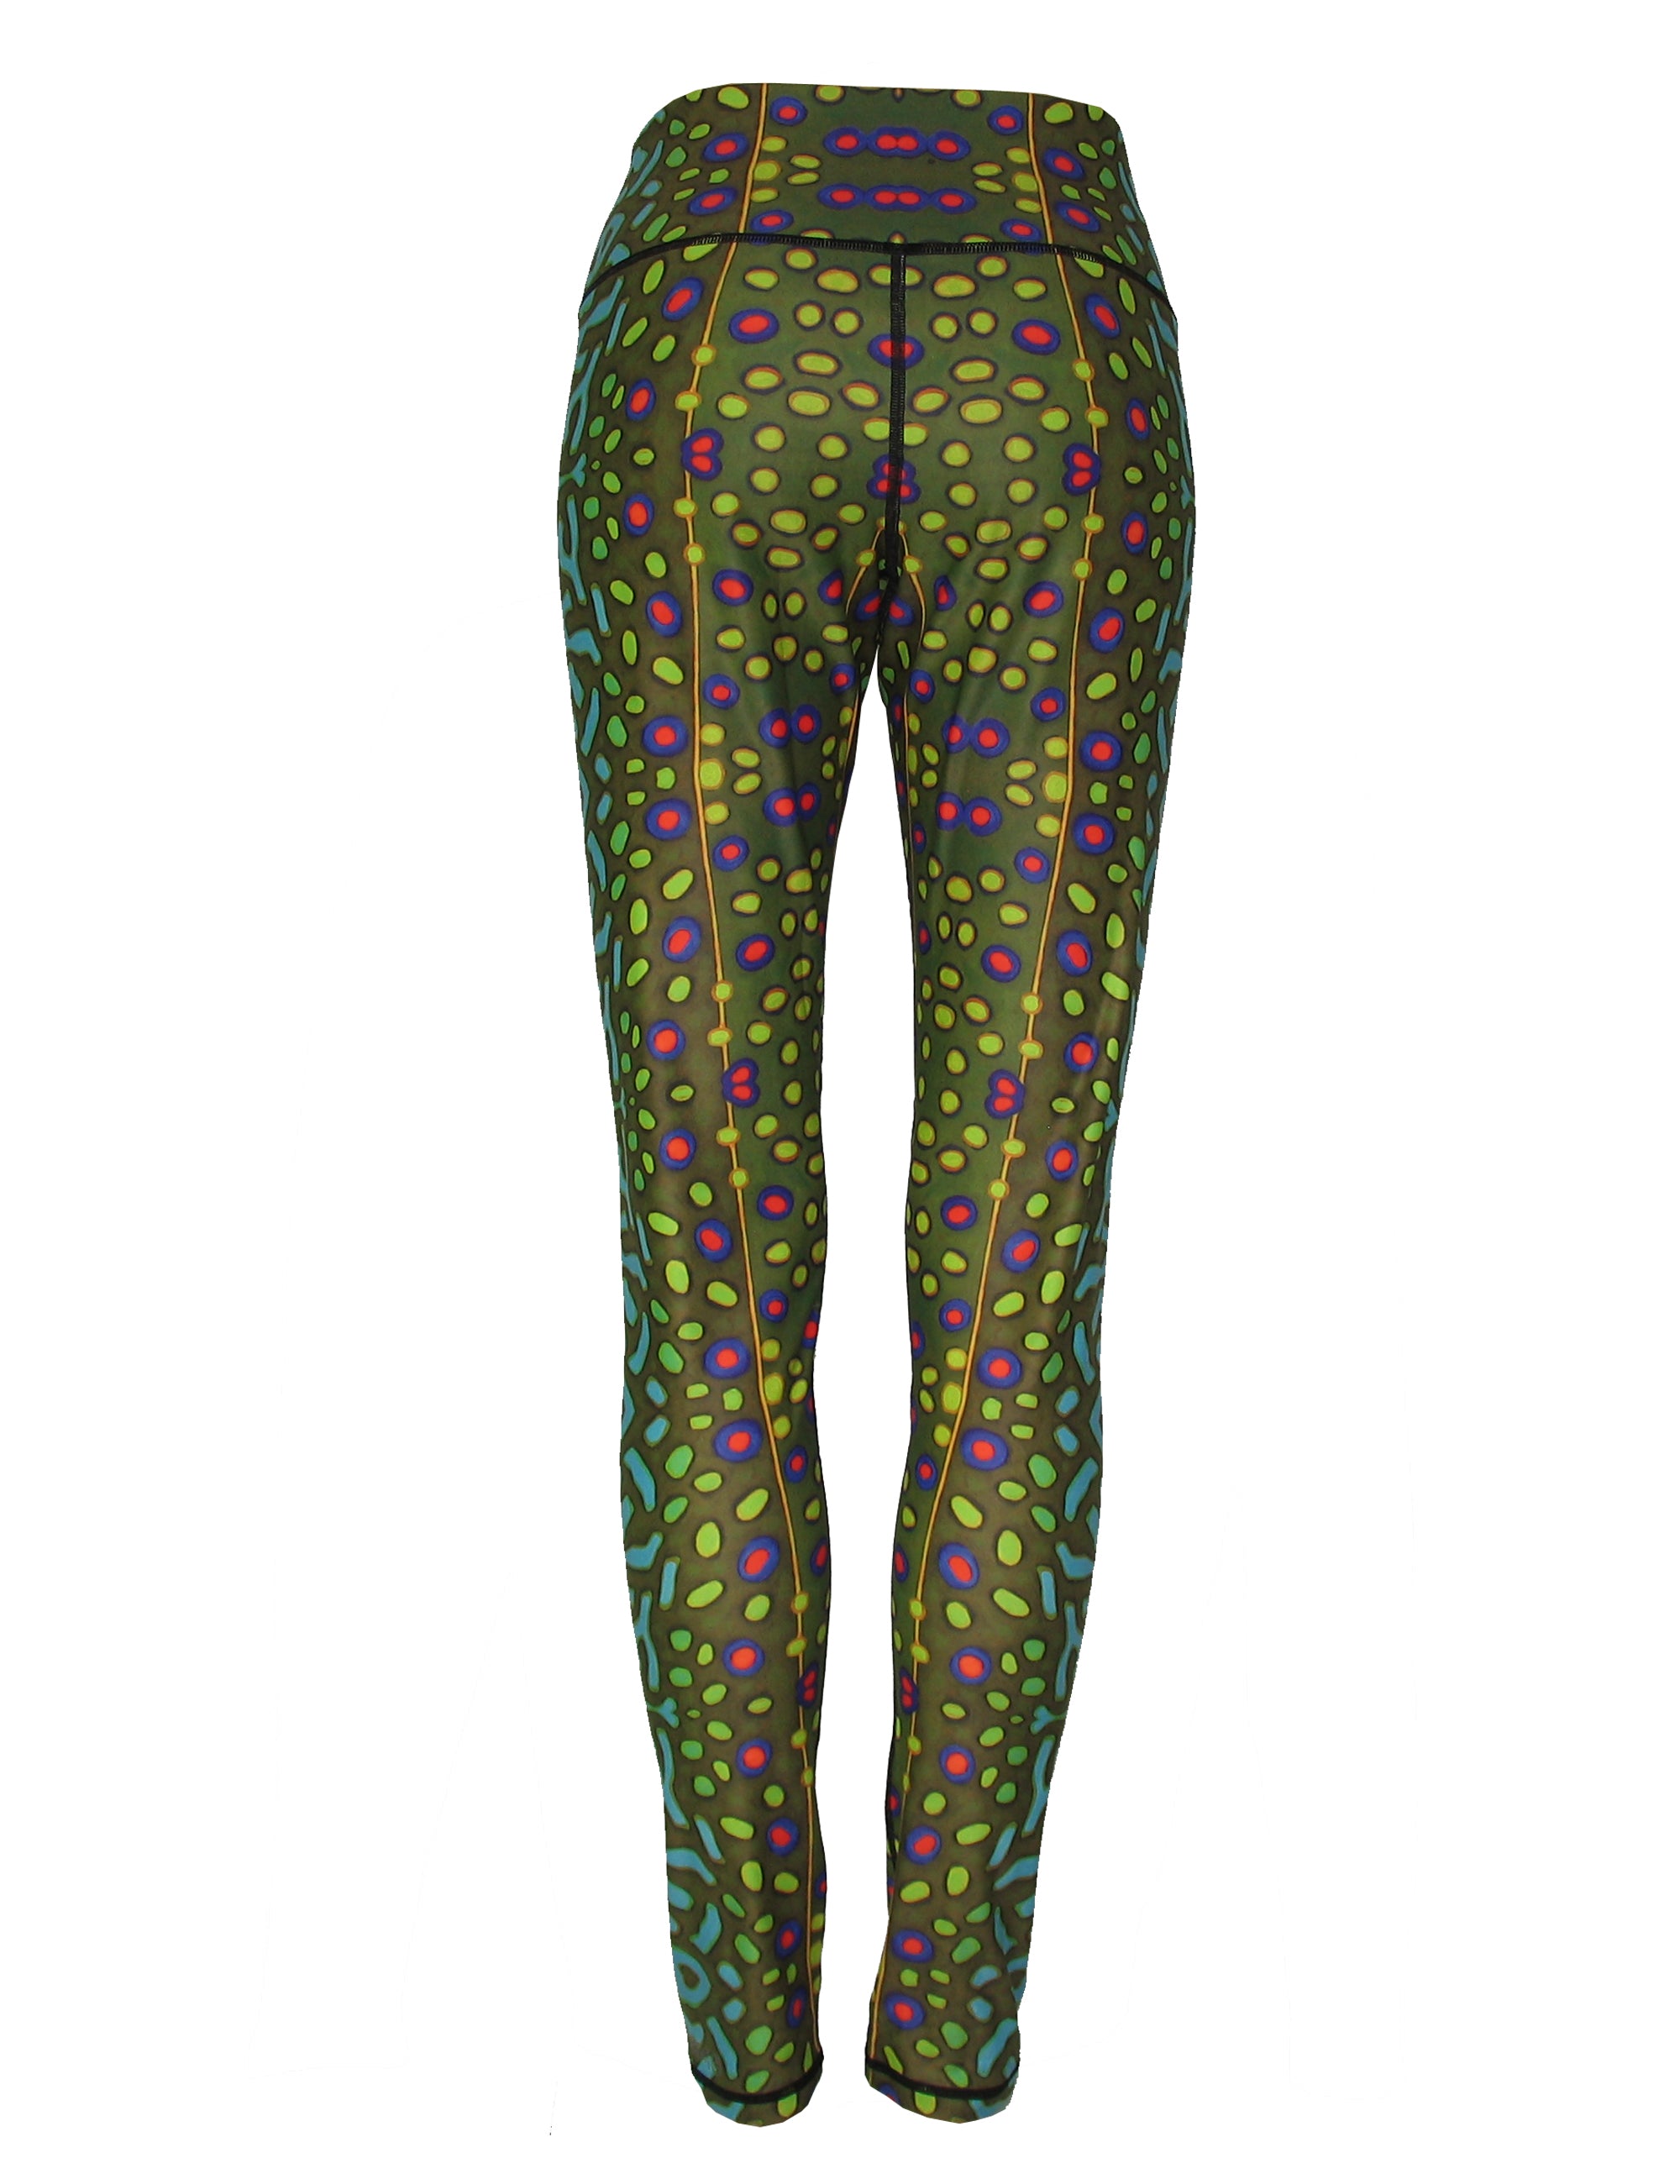 Fincognito All Sport Leggings Womens Brook Trout 2 Fly Fishing